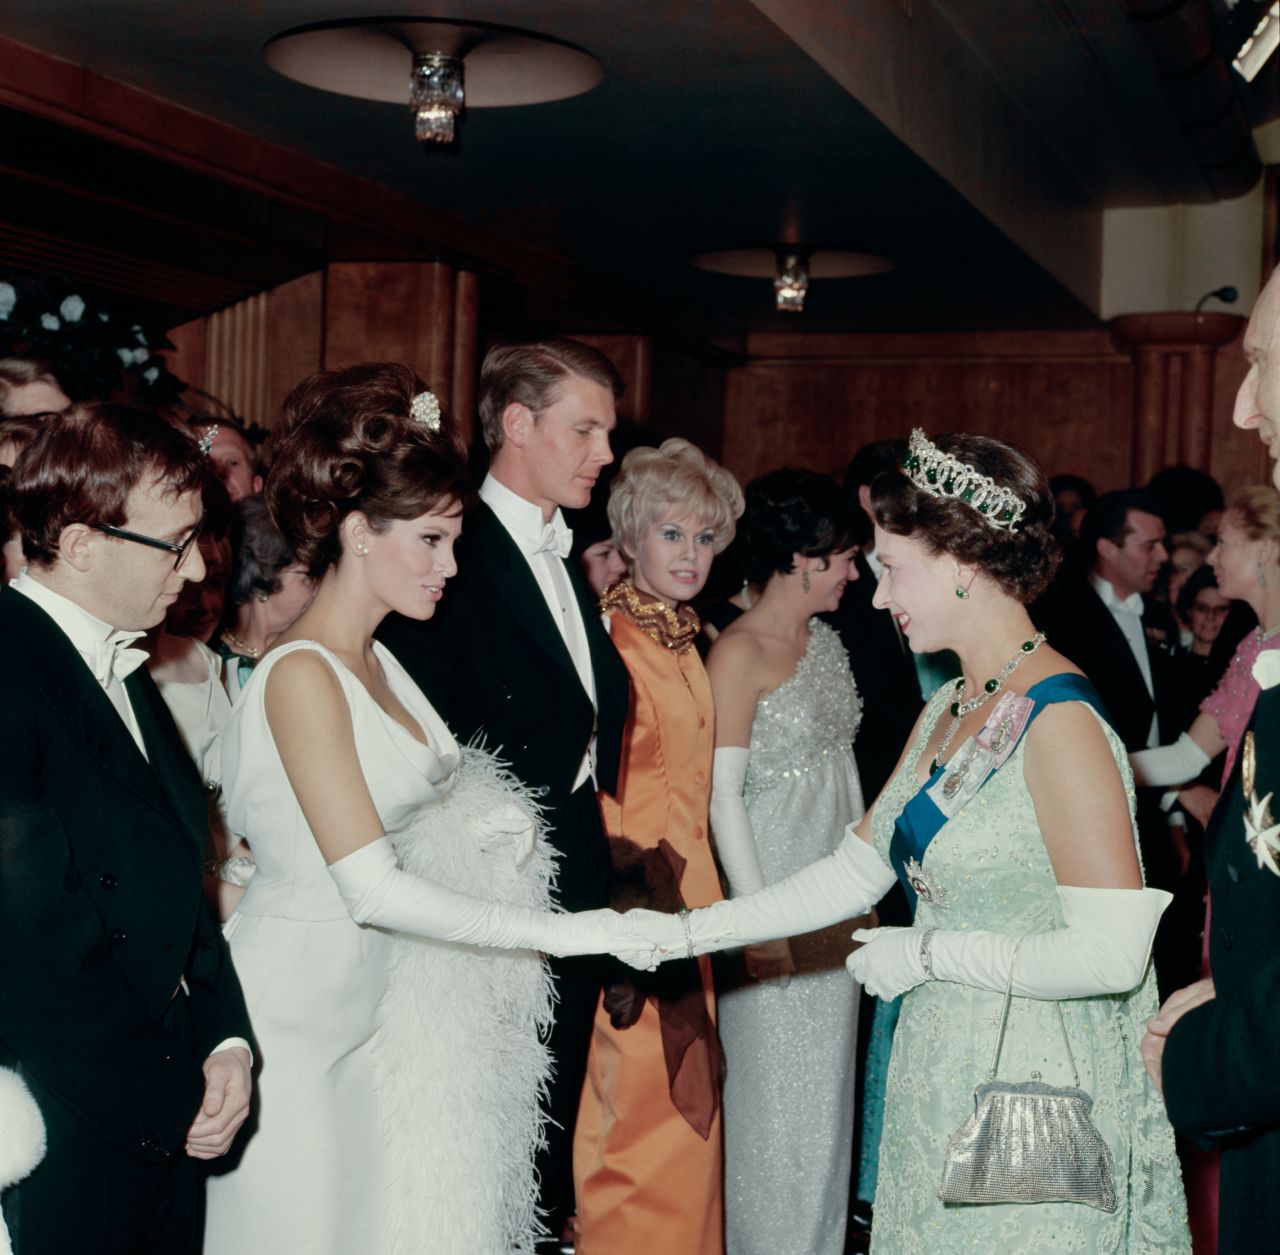 Welch shakes hands with Britain's Queen Elizabeth II at a Royal Film performance in 1966. At left is director Woody Allen.